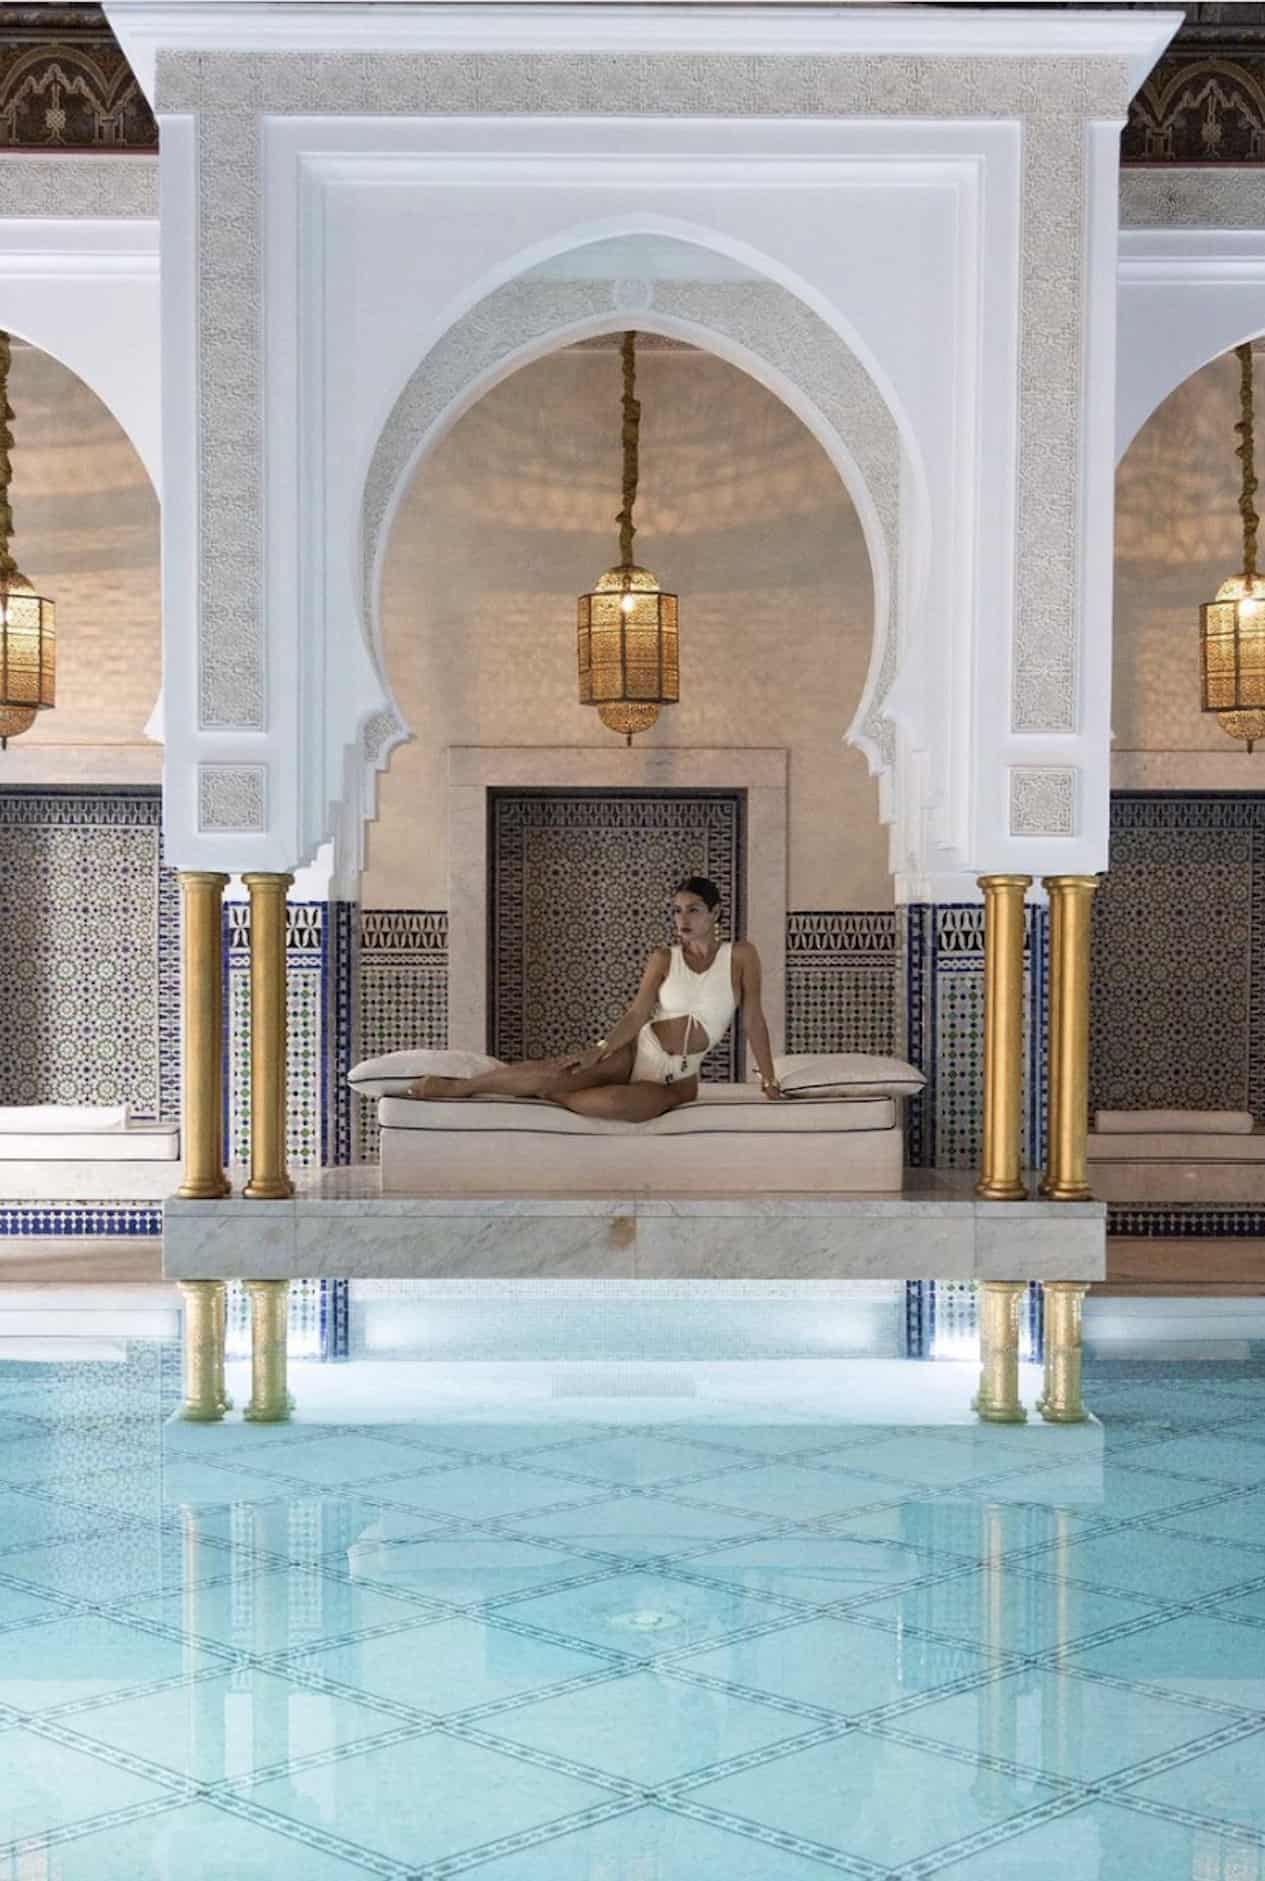 image of a woman sitting in the middle of a luxurious indoor pool at a spa, wearing a white swimsuit